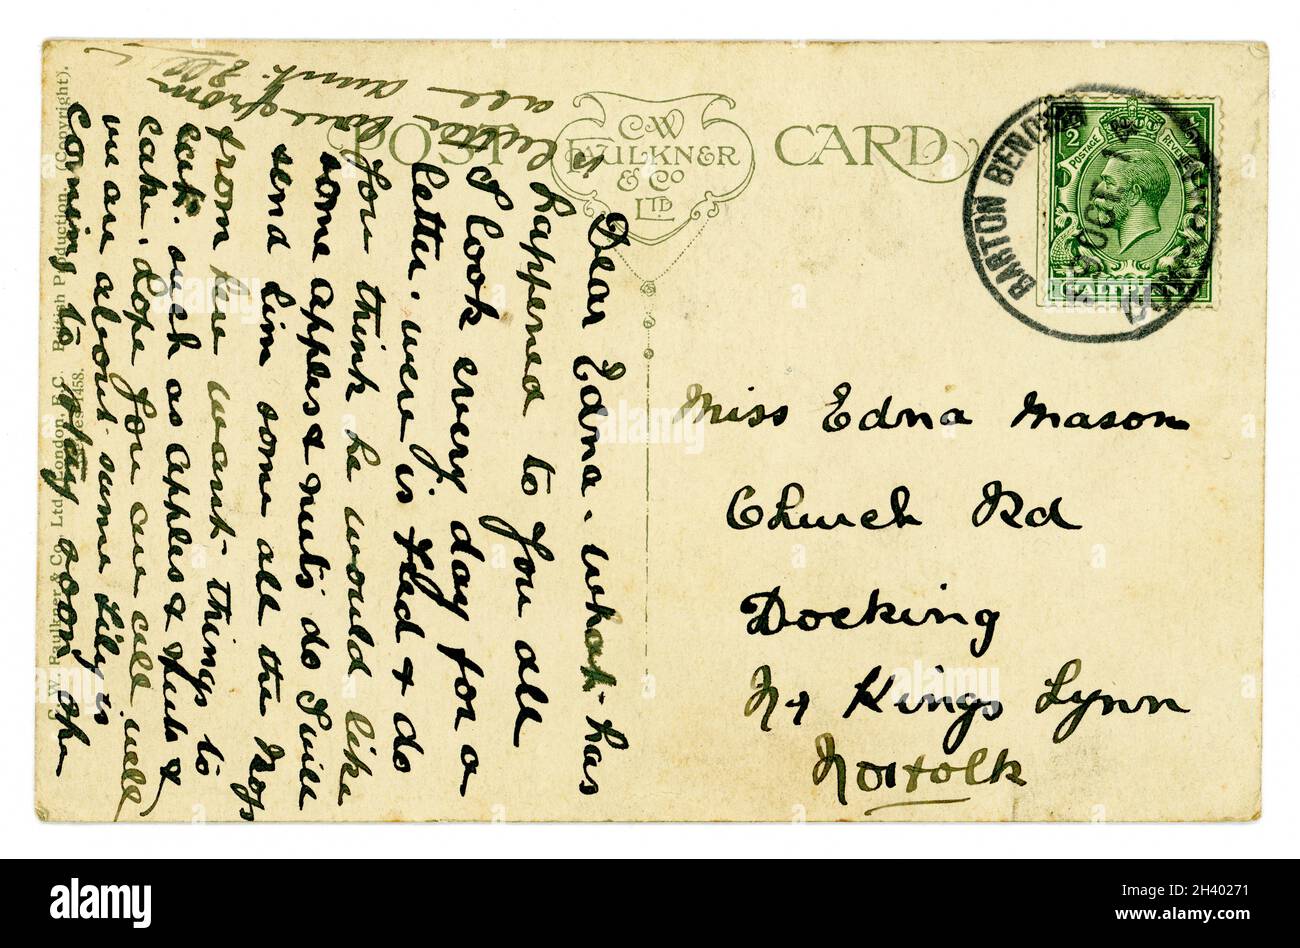 Reverse of original WW1 era postcard posted 19 Oct 1914 with green King George V 1/2 d (half pence / penny) stamp, franked. U.K. Stock Photo